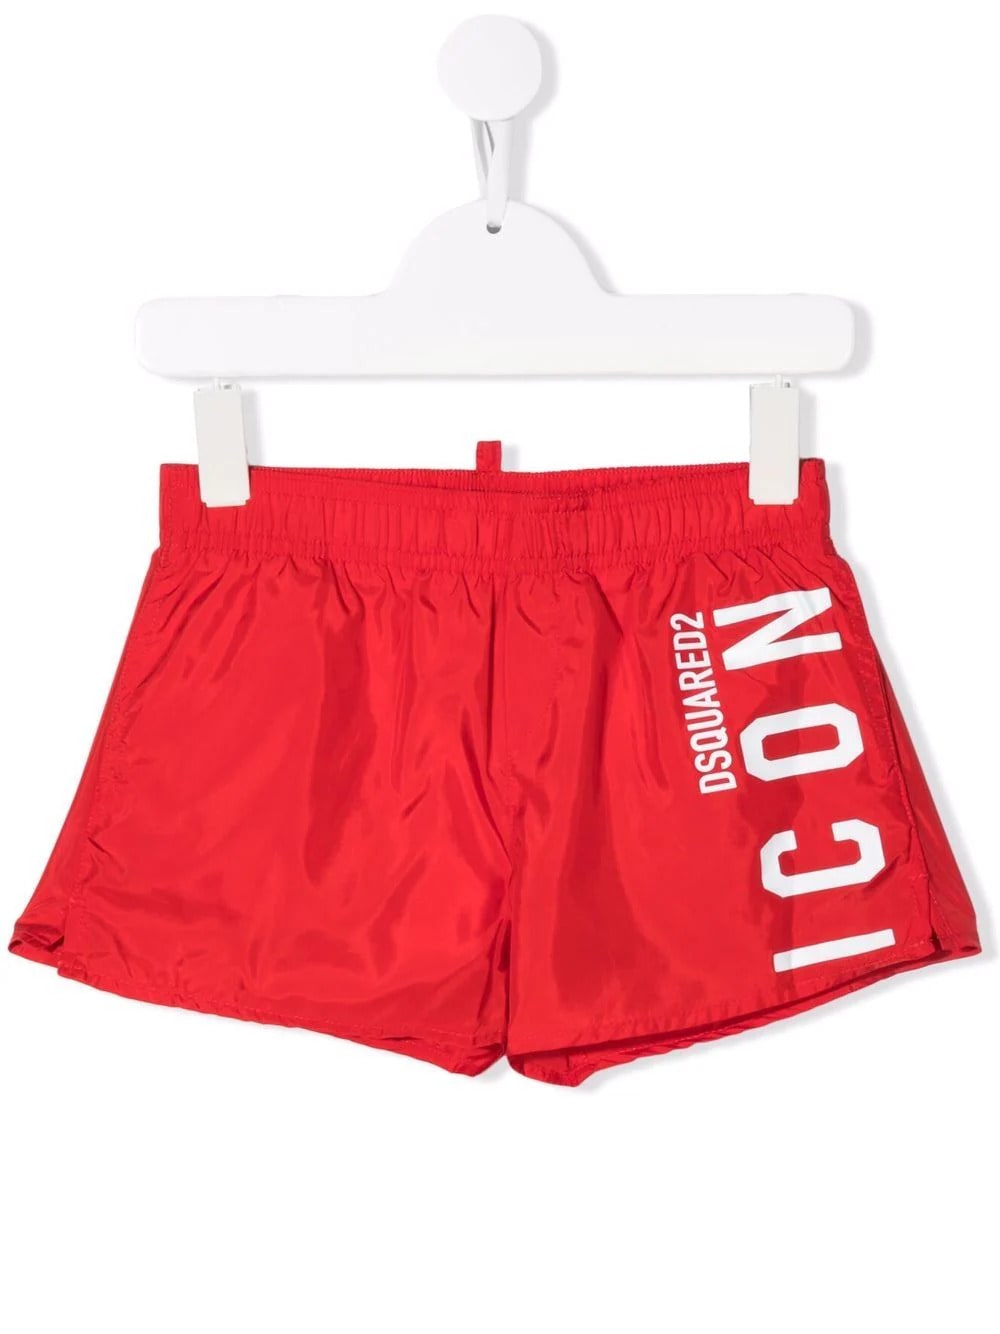 Kids Red Swim Shorts With Icon Dsquared2 Logo